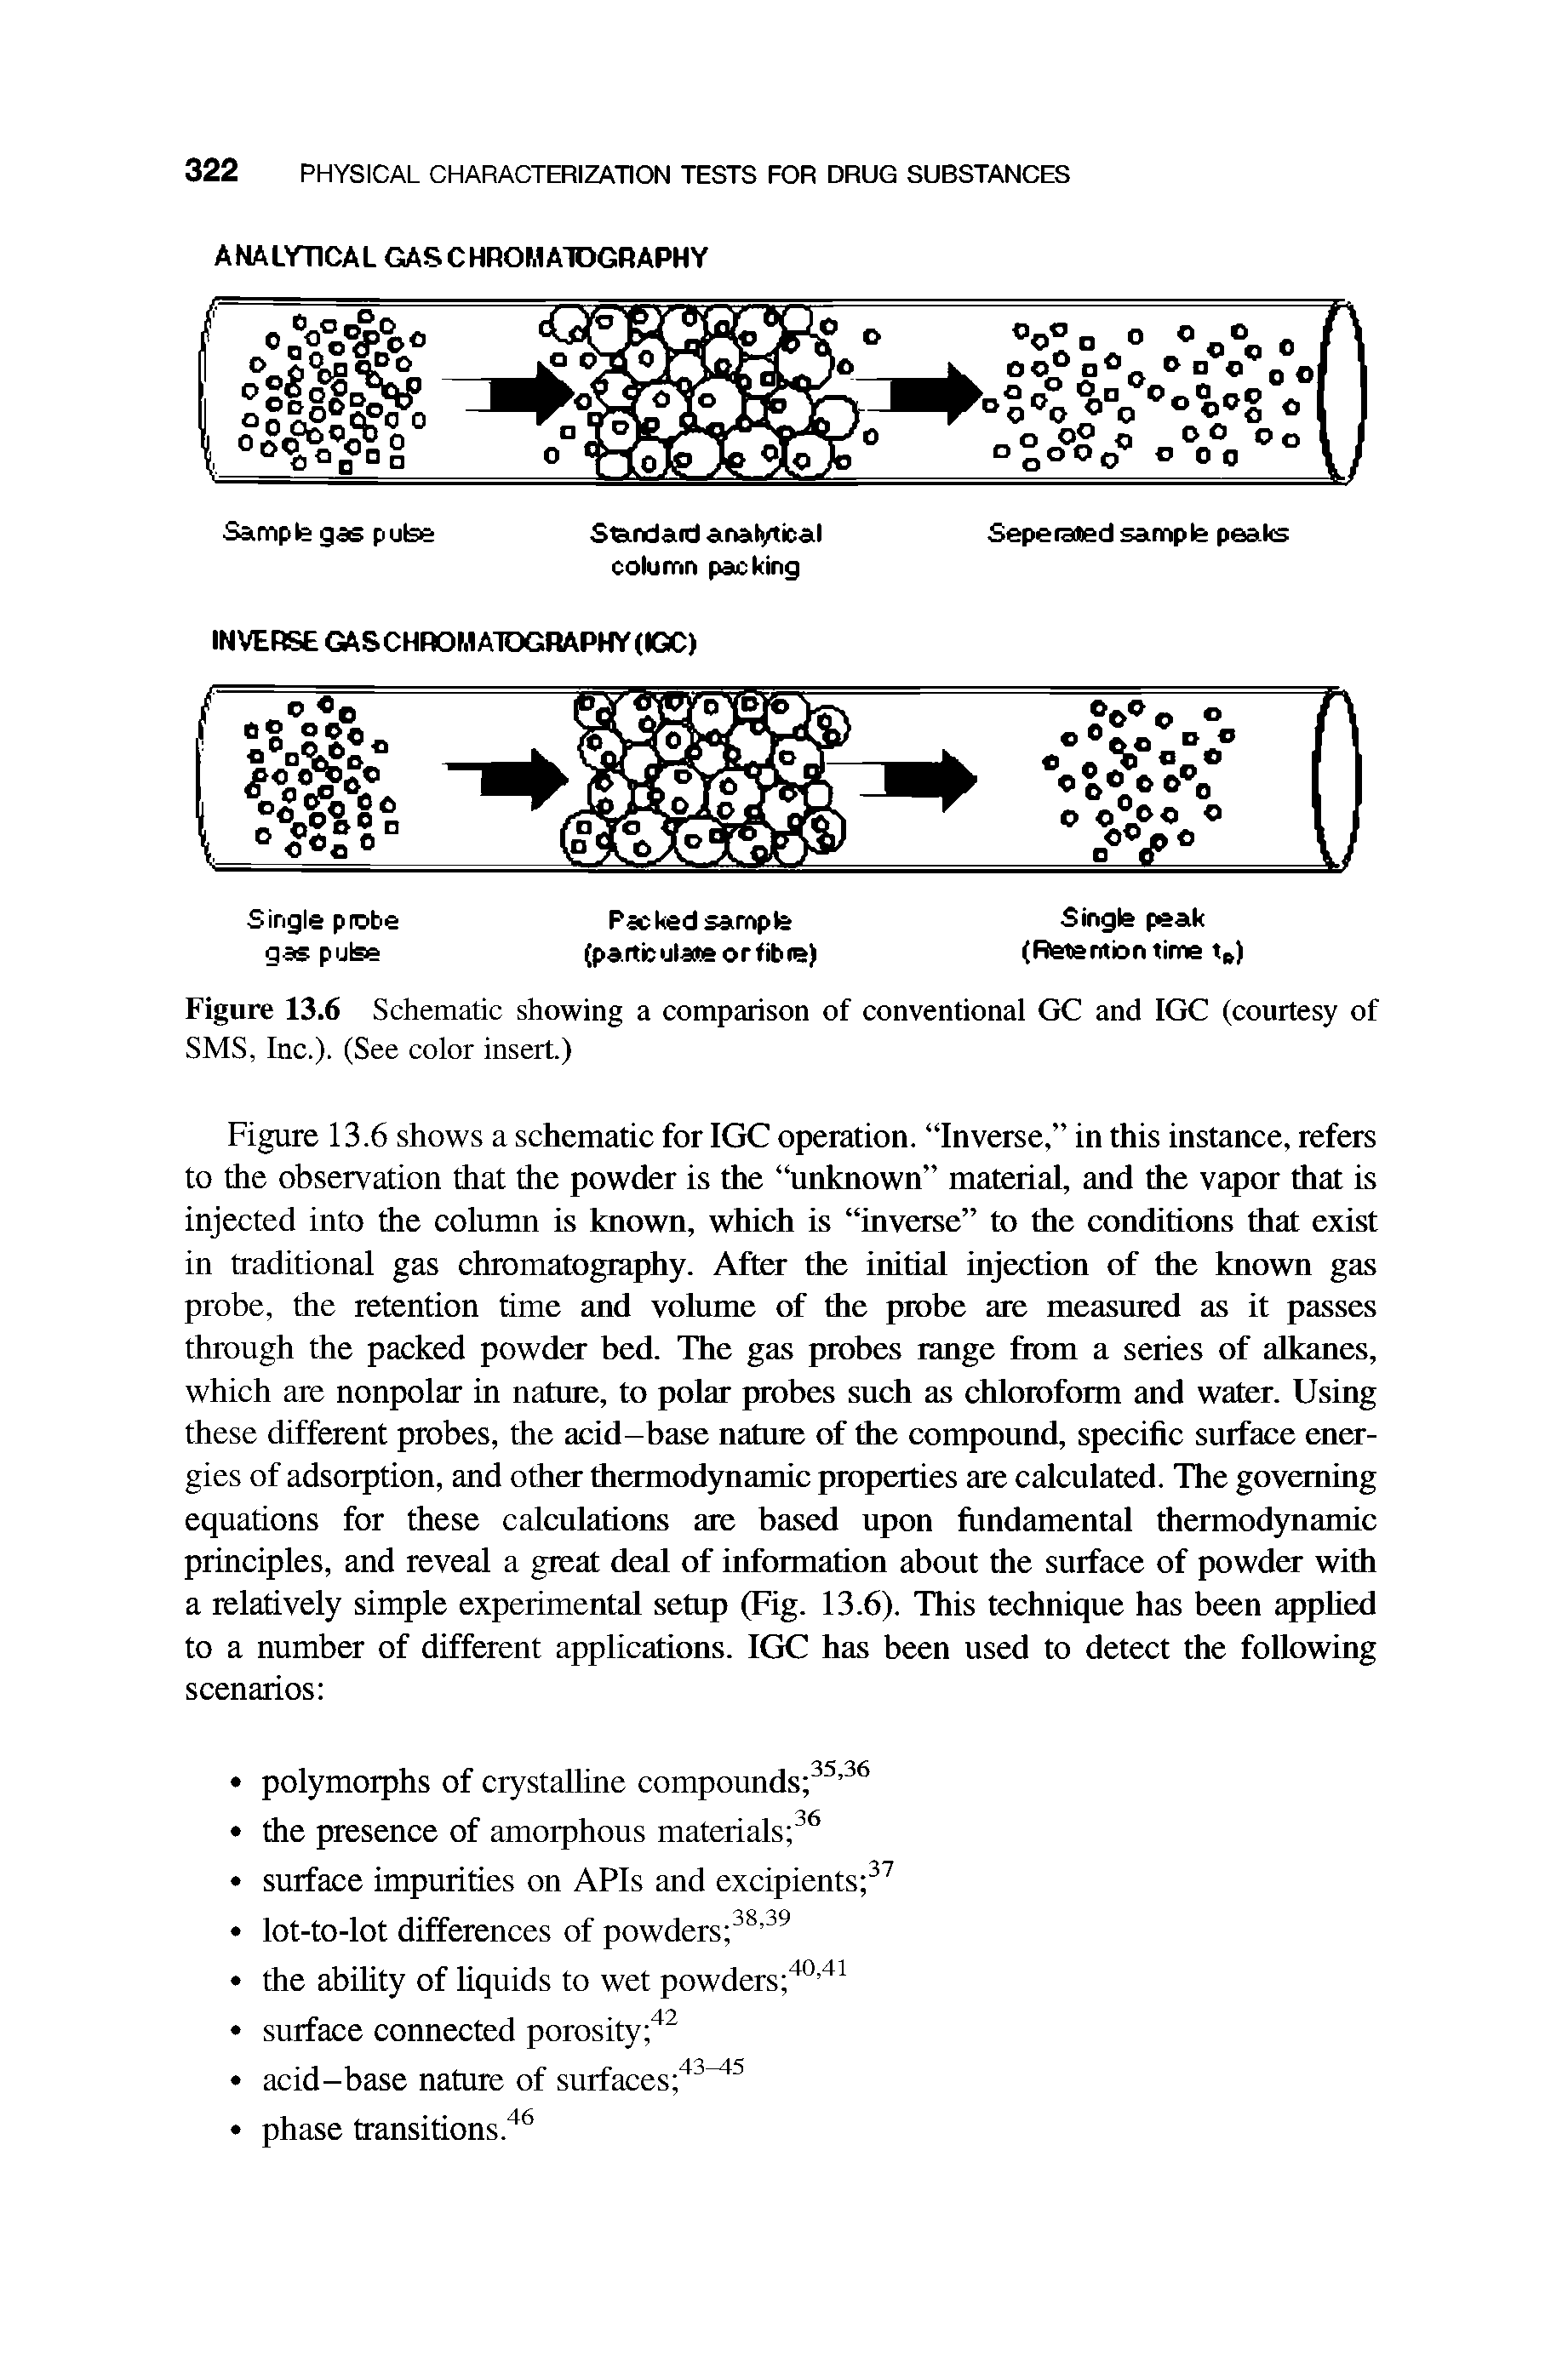 Figure 13.6 shows a schematic for IGC operation. Inverse, in this instance, refers to the observation that the powder is the unknown material, and the vapor that is injected into the column is known, which is inverse to the conditions that exist in traditional gas chromatography. After the initial injection of the known gas probe, the retention time and volume of the probe are measured as it passes through the packed powder bed. The gas probes range from a series of alkanes, which are nonpolar in nature, to polar probes such as chloroform and water. Using these different probes, the acid-base nature of the compound, specific surface energies of adsorption, and other thermodynamic properties are calculated. The governing equations for these calculations are based upon fundamental thermodynamic principles, and reveal a great deal of information about the surface of powder with a relatively simple experimental setup (Fig. 13.6). This technique has been applied to a number of different applications. IGC has been used to detect the following scenarios ...